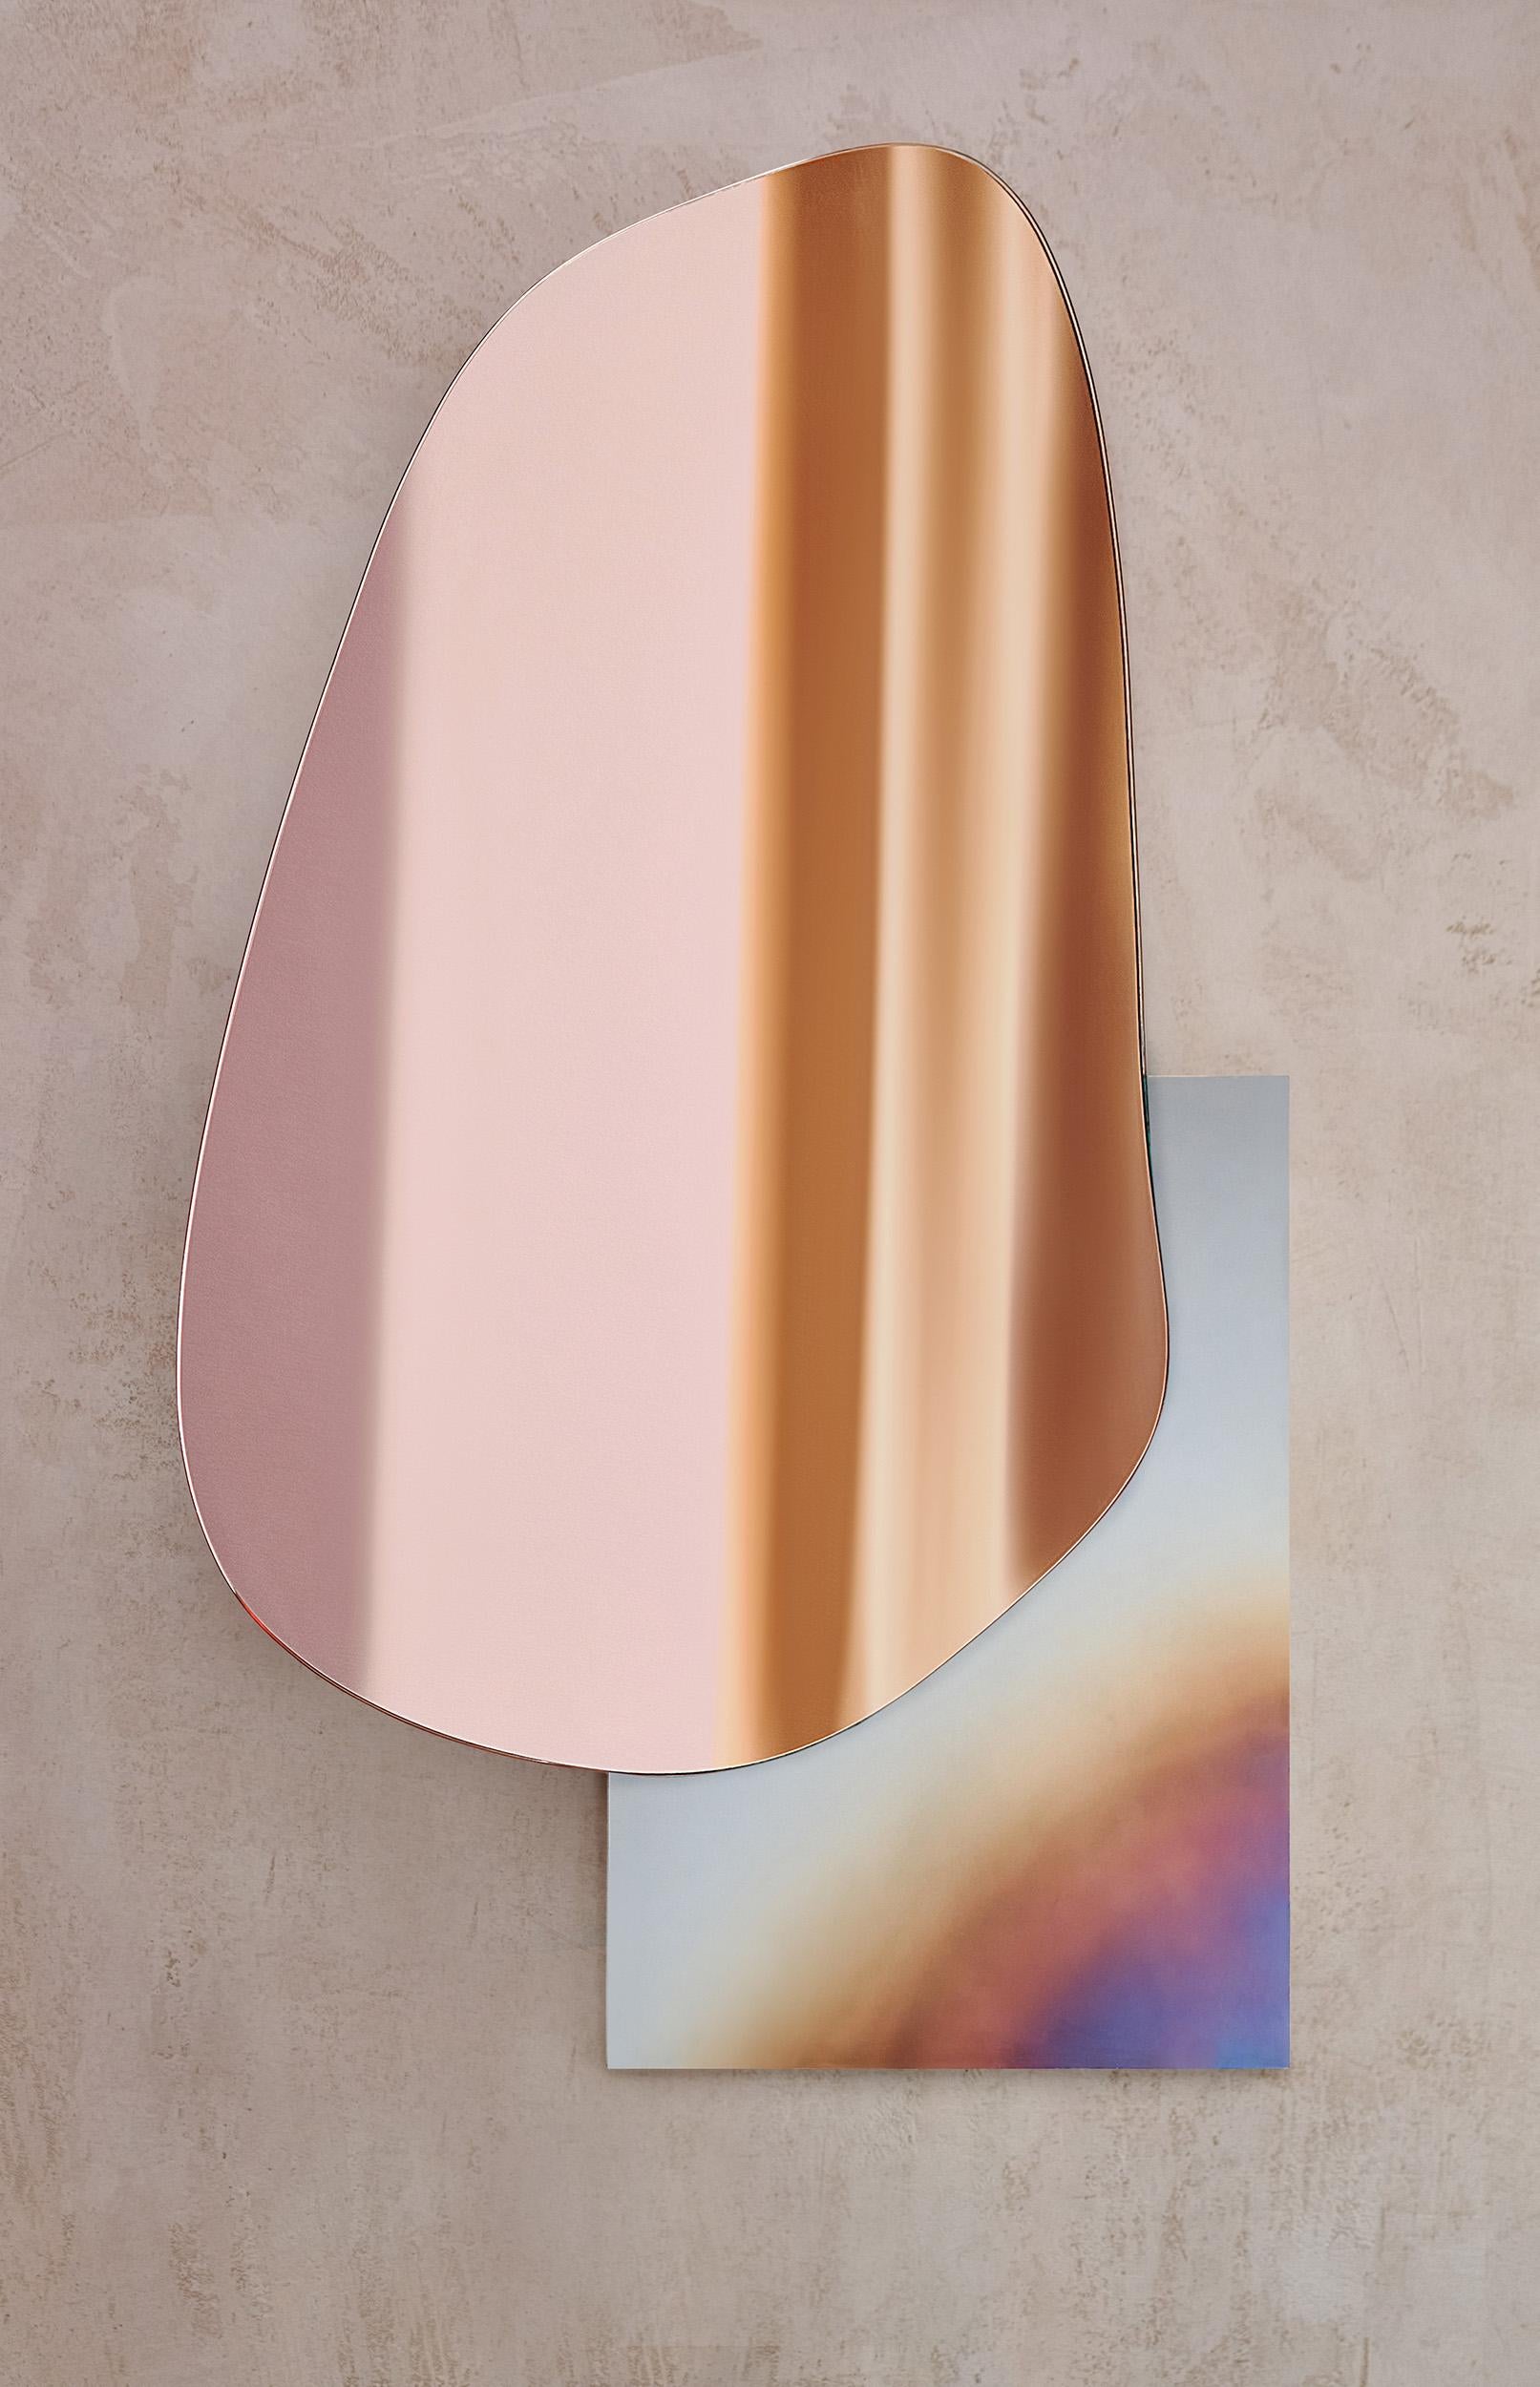 Modern Lake Wall Mirror by Noom
Designers: Maryna Dague & Nathan Baraness

Model shown in picture:
Number 3
Base in burned steel and copper tint mirror

